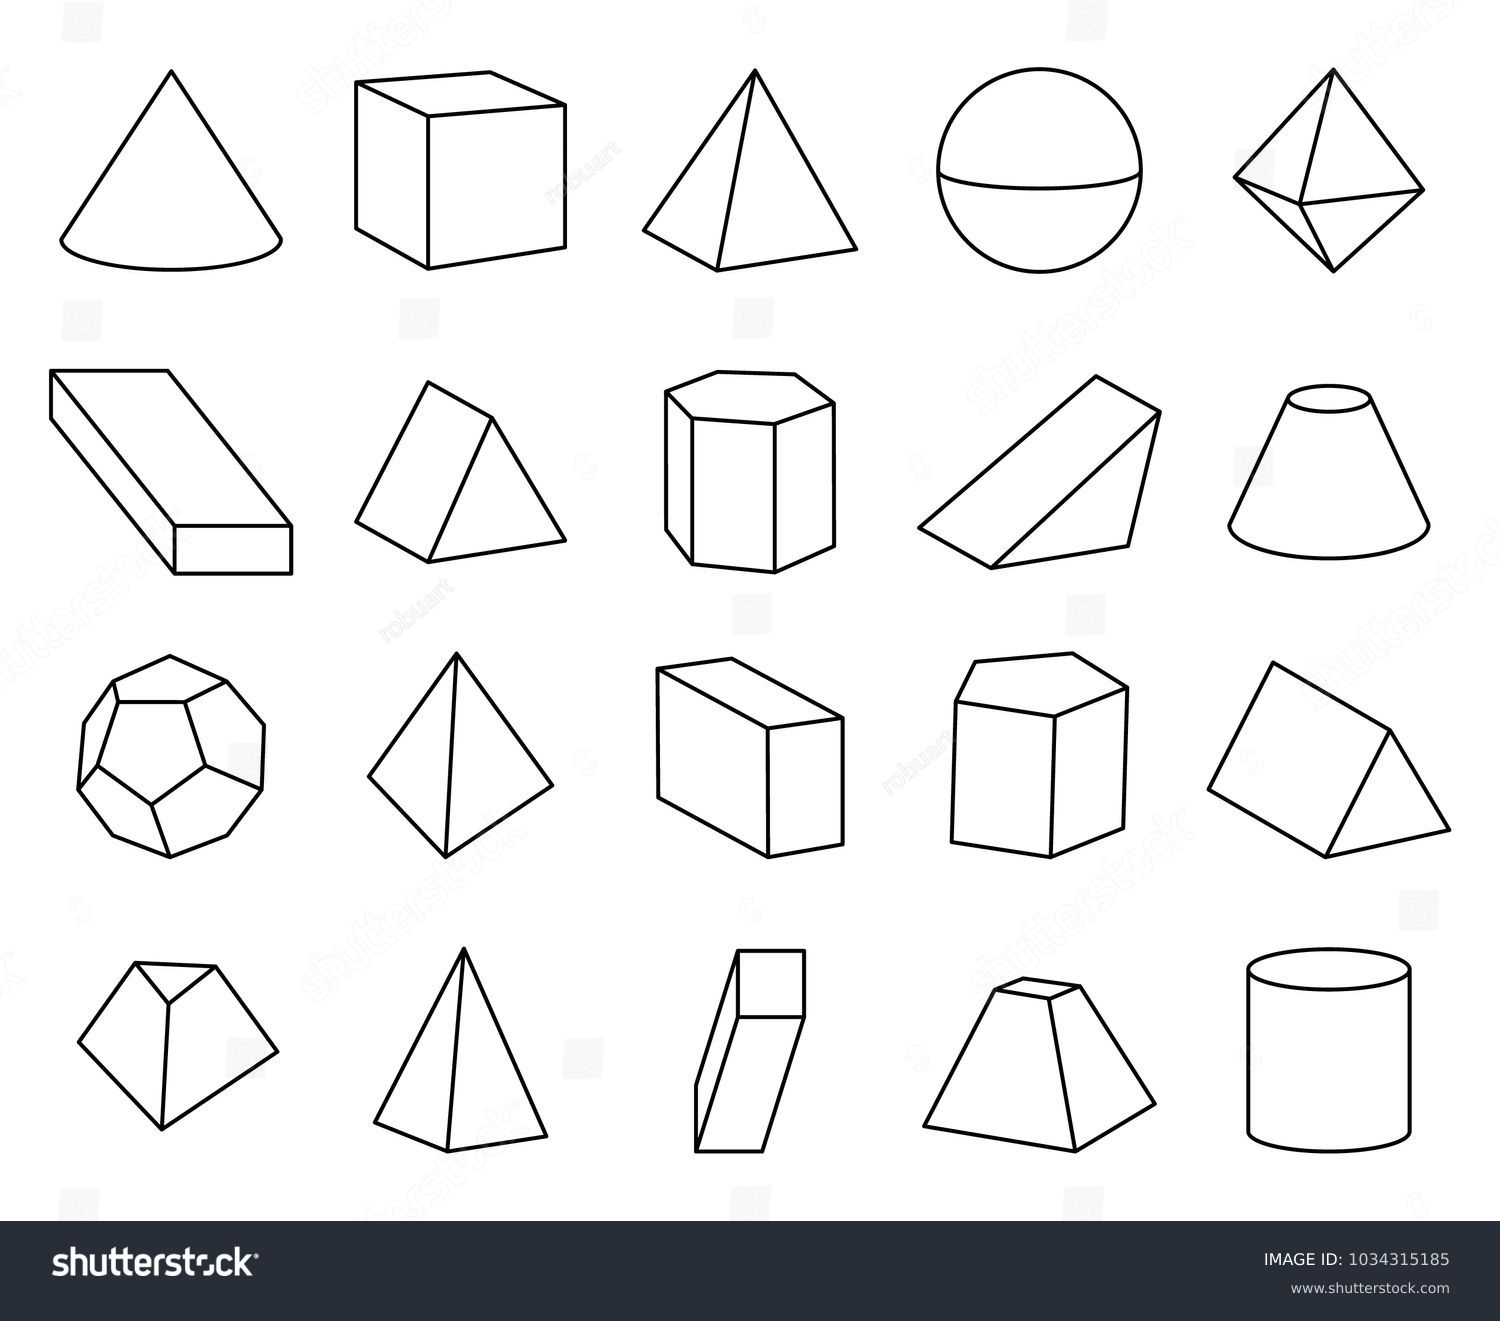 322,498 3d shapes drawing Images, Stock Photos & Vectors | Shutterstock